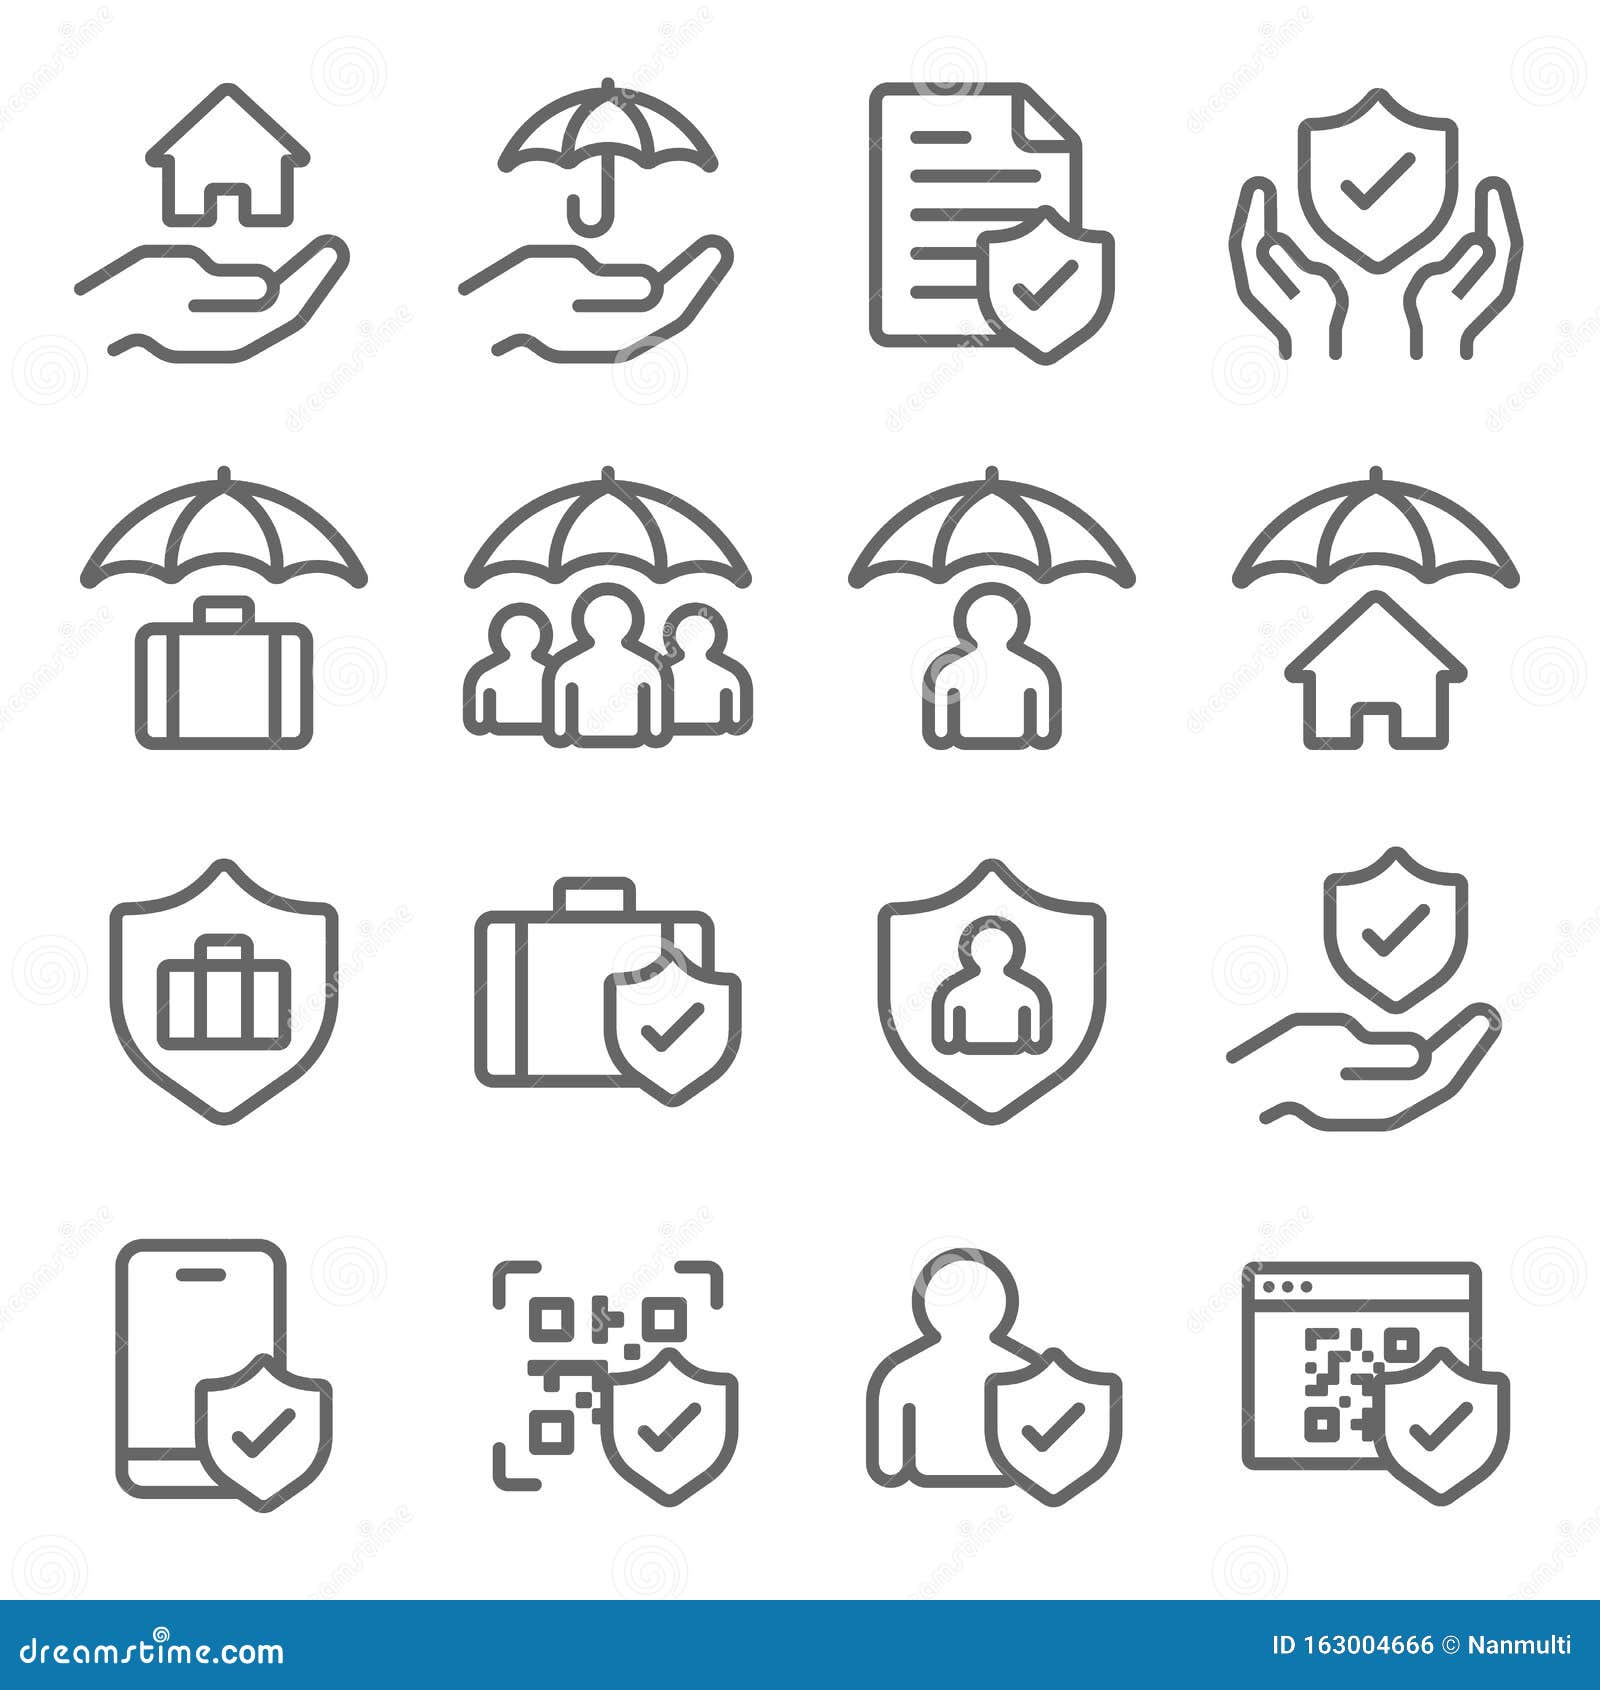 insurance icons set  . contains such icon as life insurance, protection, cyber security, health care and more. e